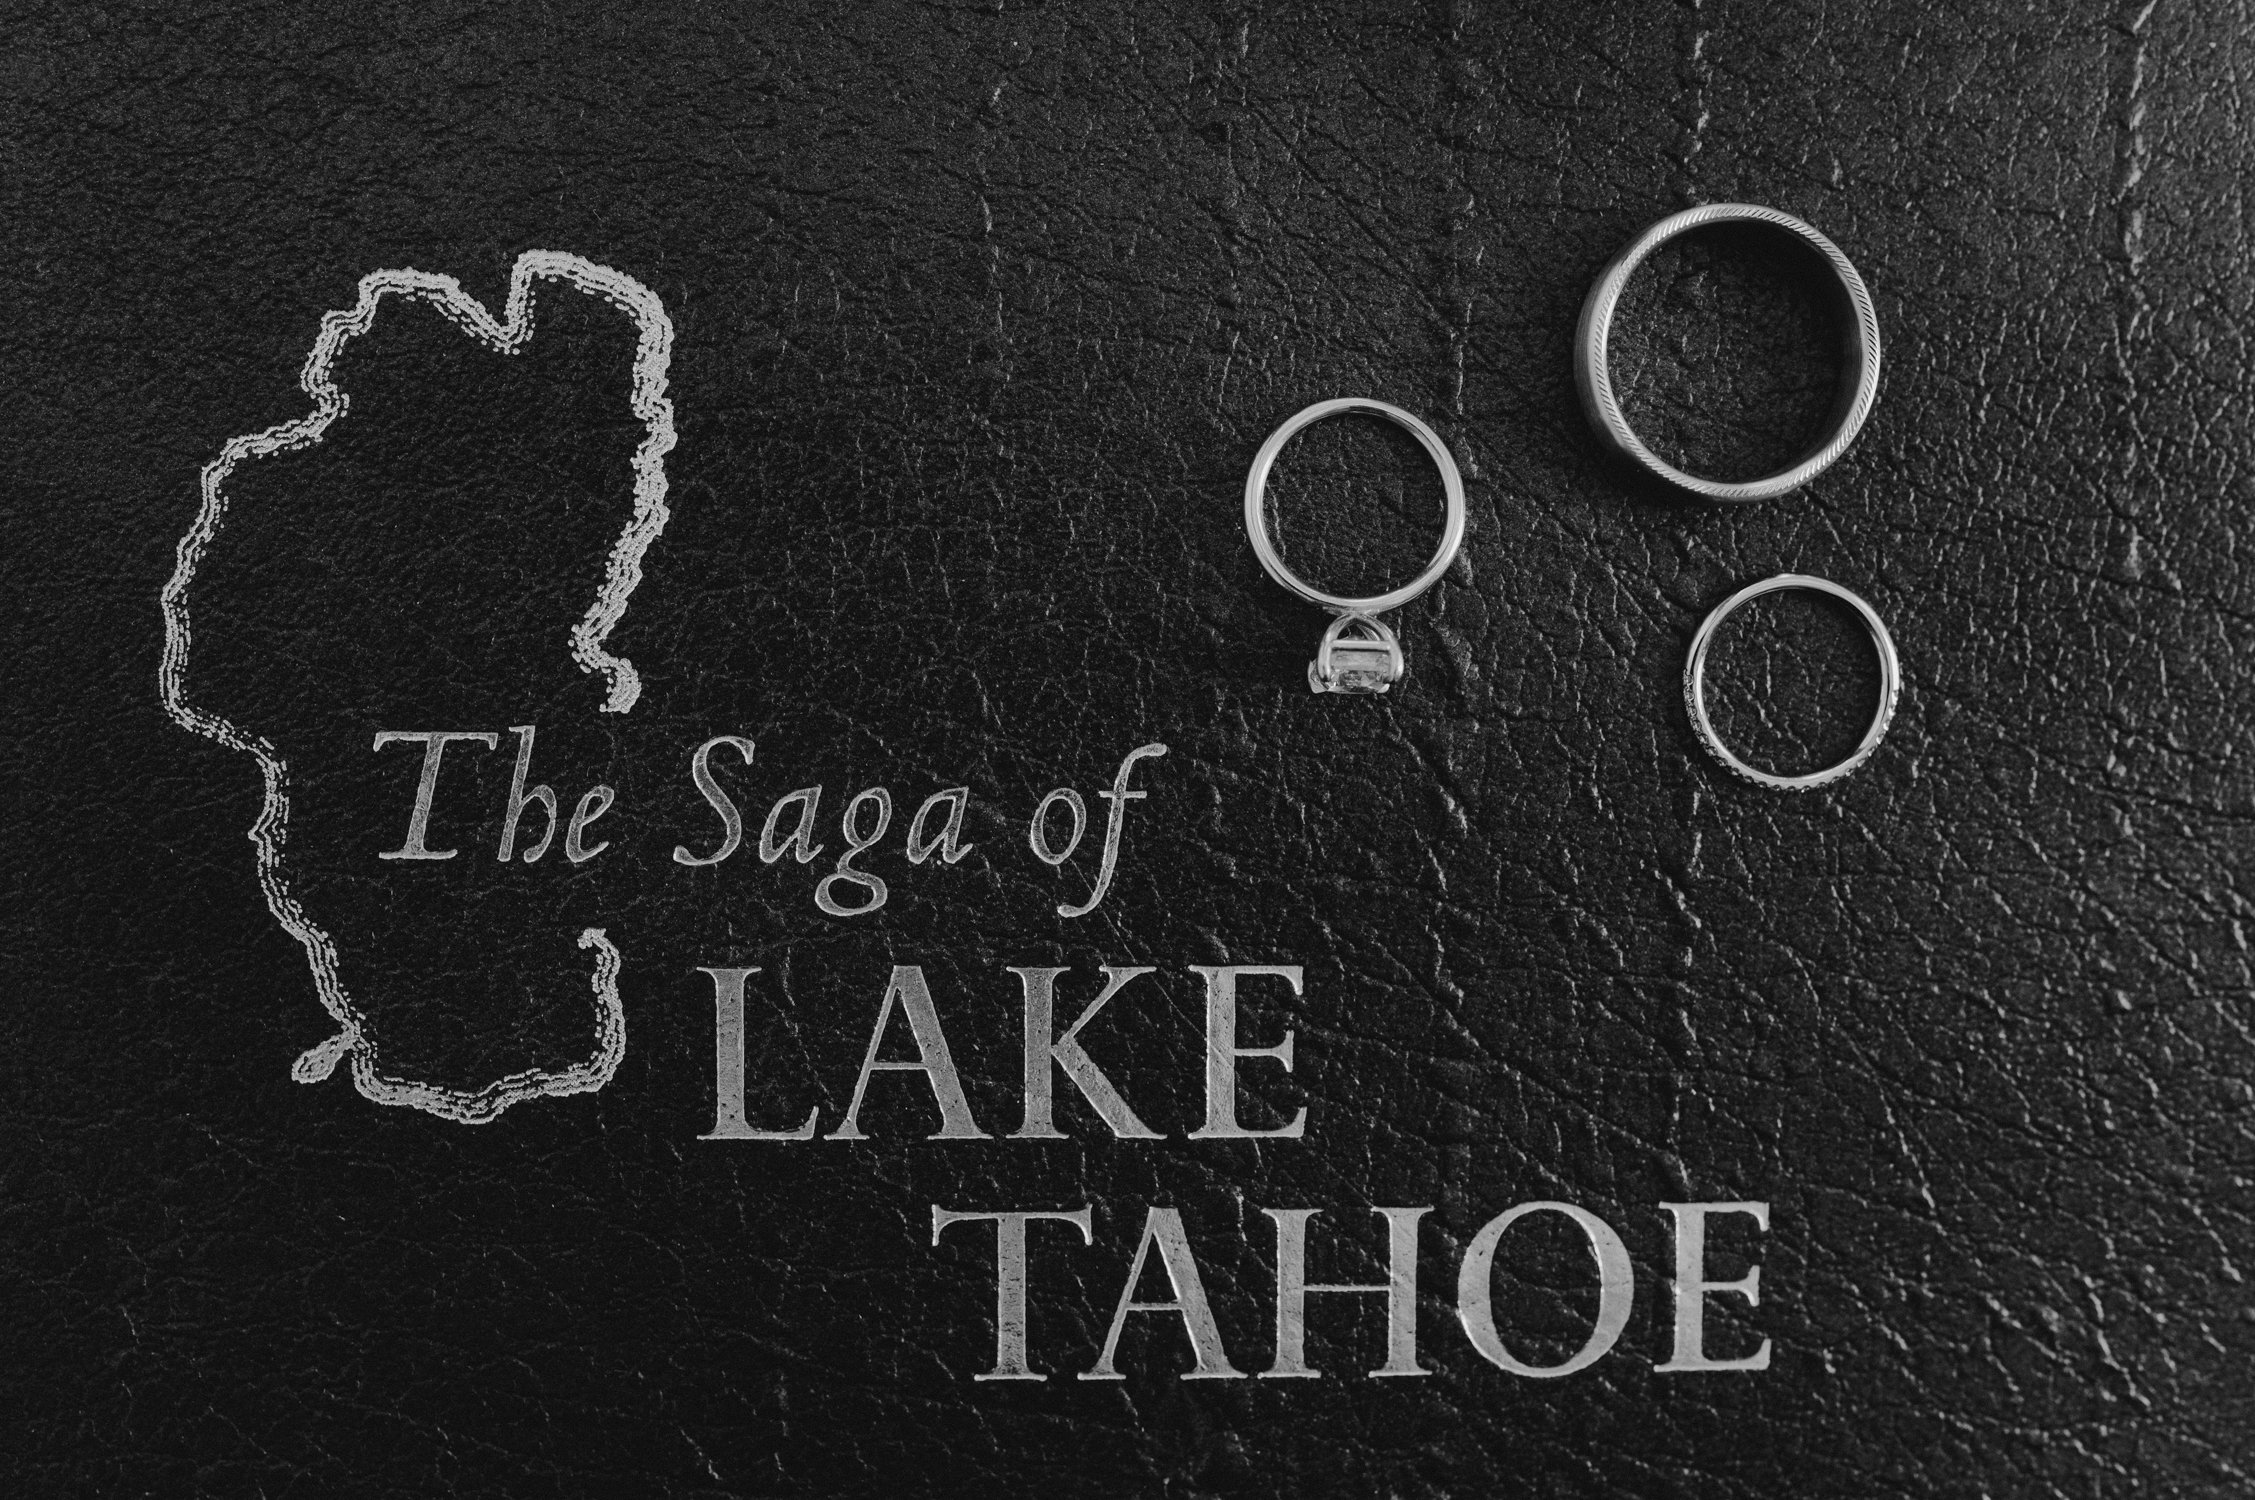 An elopement during a historic winter in tahoe, photo of the saga of Lake Tahoe book